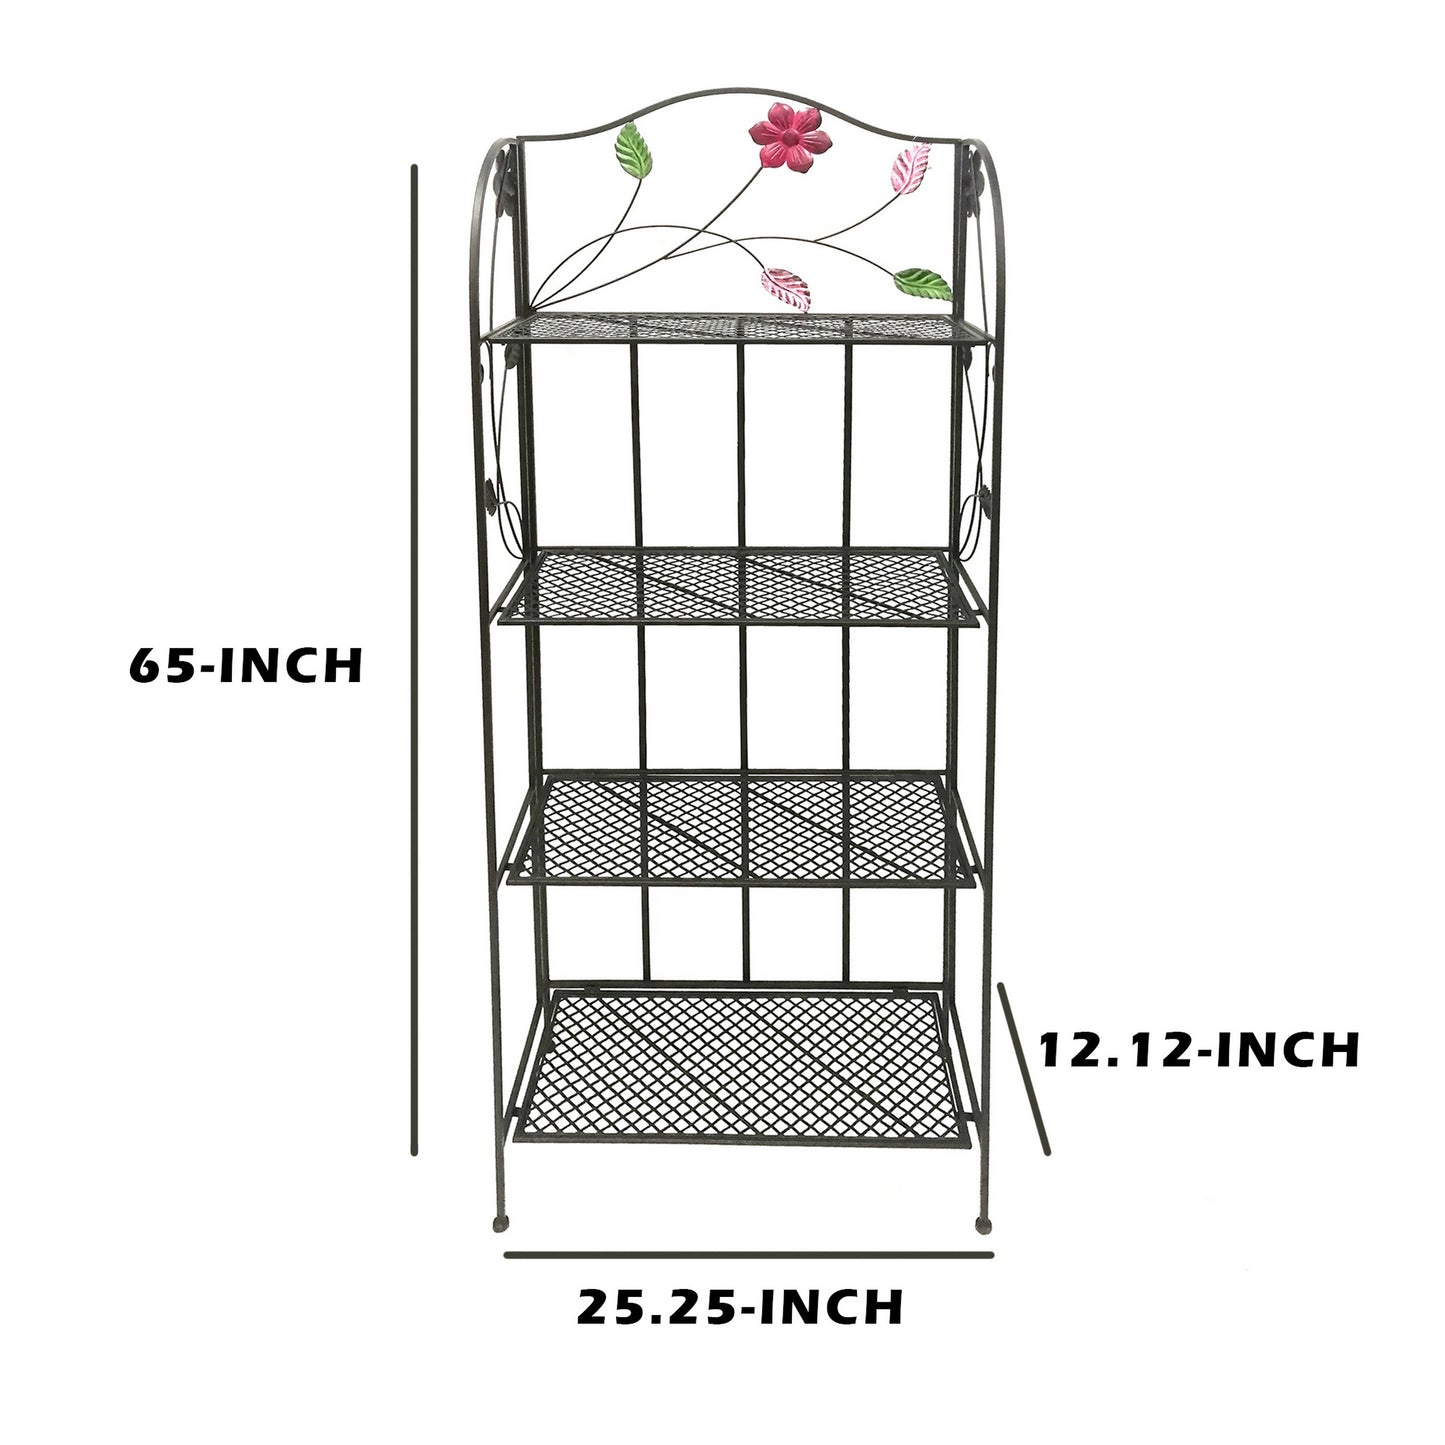 65 Inch Metal Foldable Bakers Rack, Four Tier with Flower Motifs, Black The Urban Port